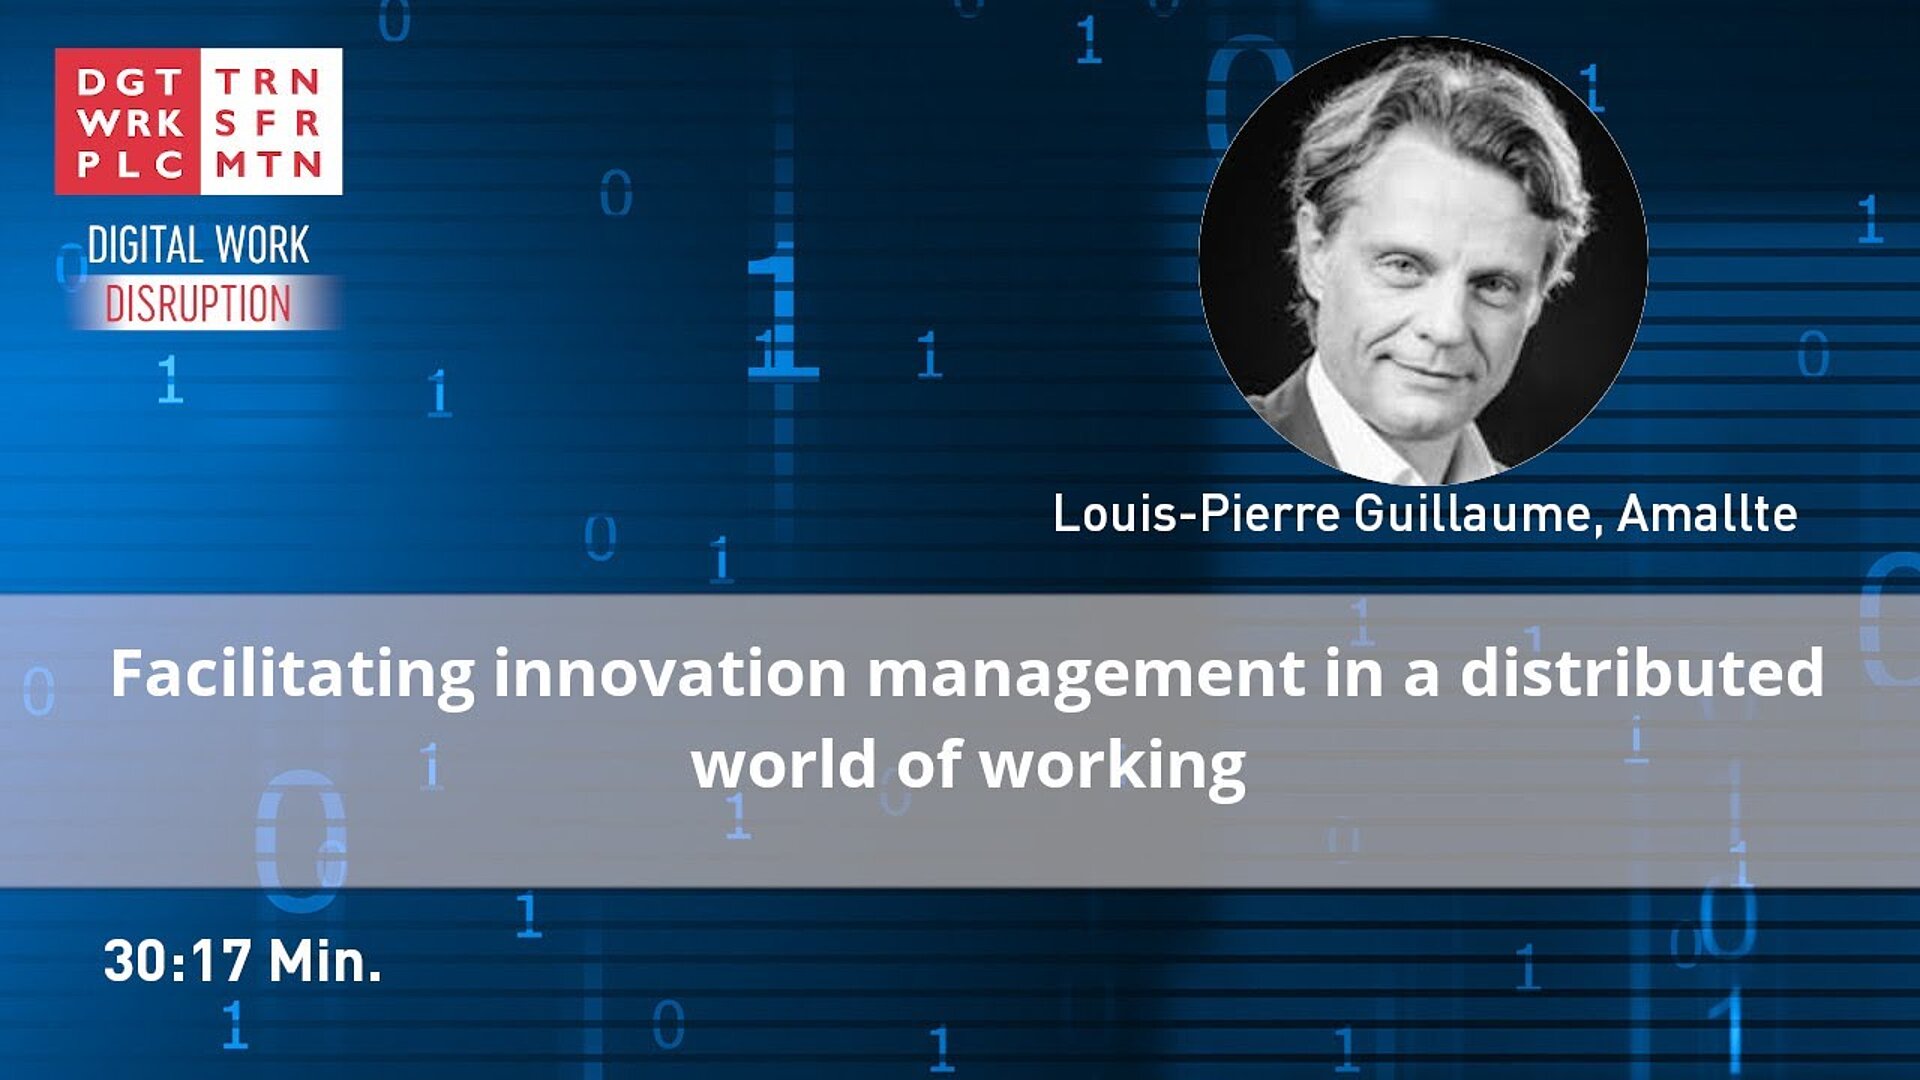 Facilitating innovation management in a distributed world of working